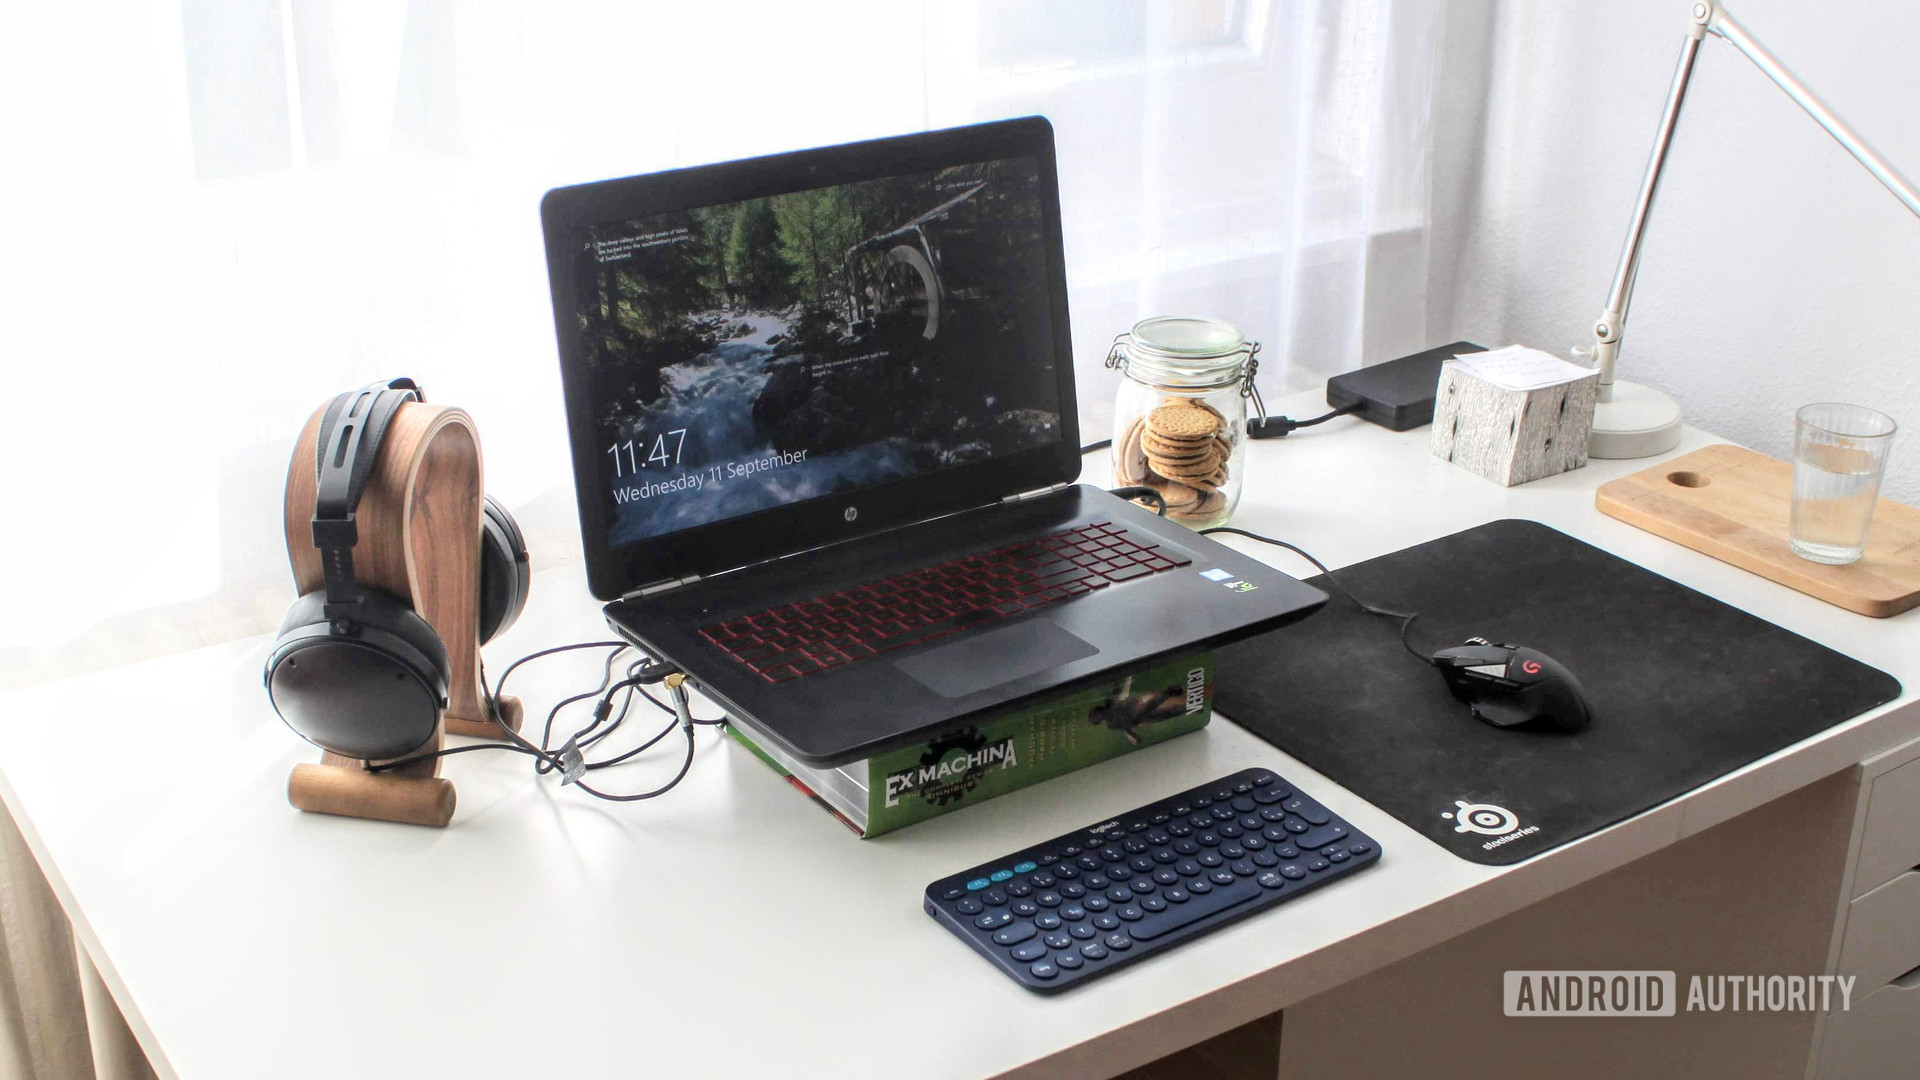 a latpop, desk, headset, mouse and book on a table